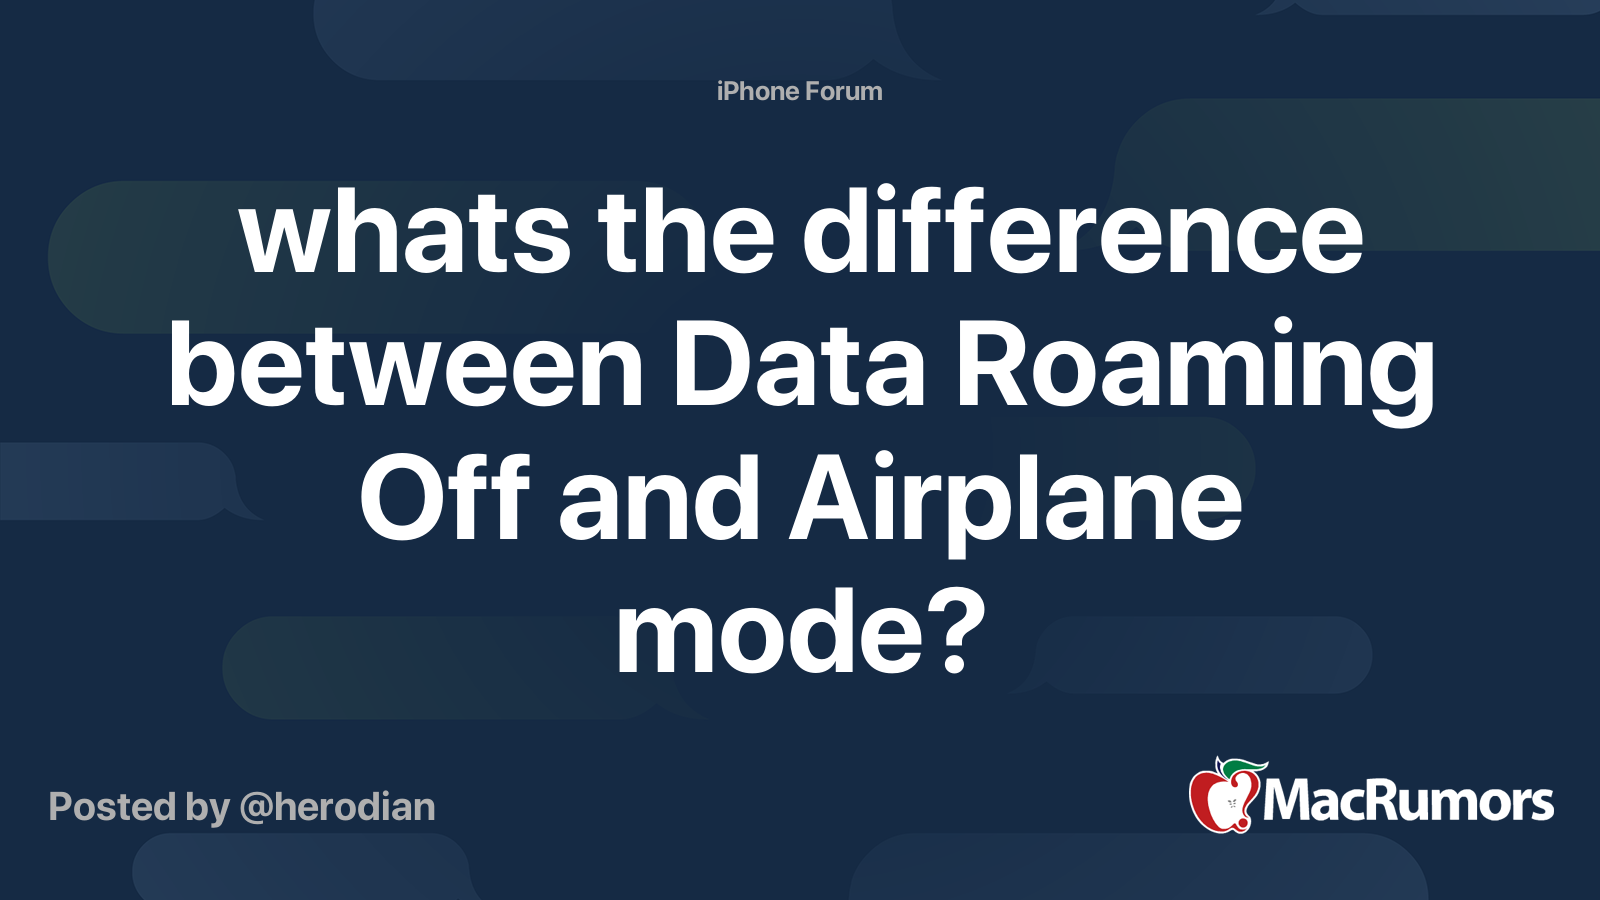 What is the difference between airplane mode and data roaming?